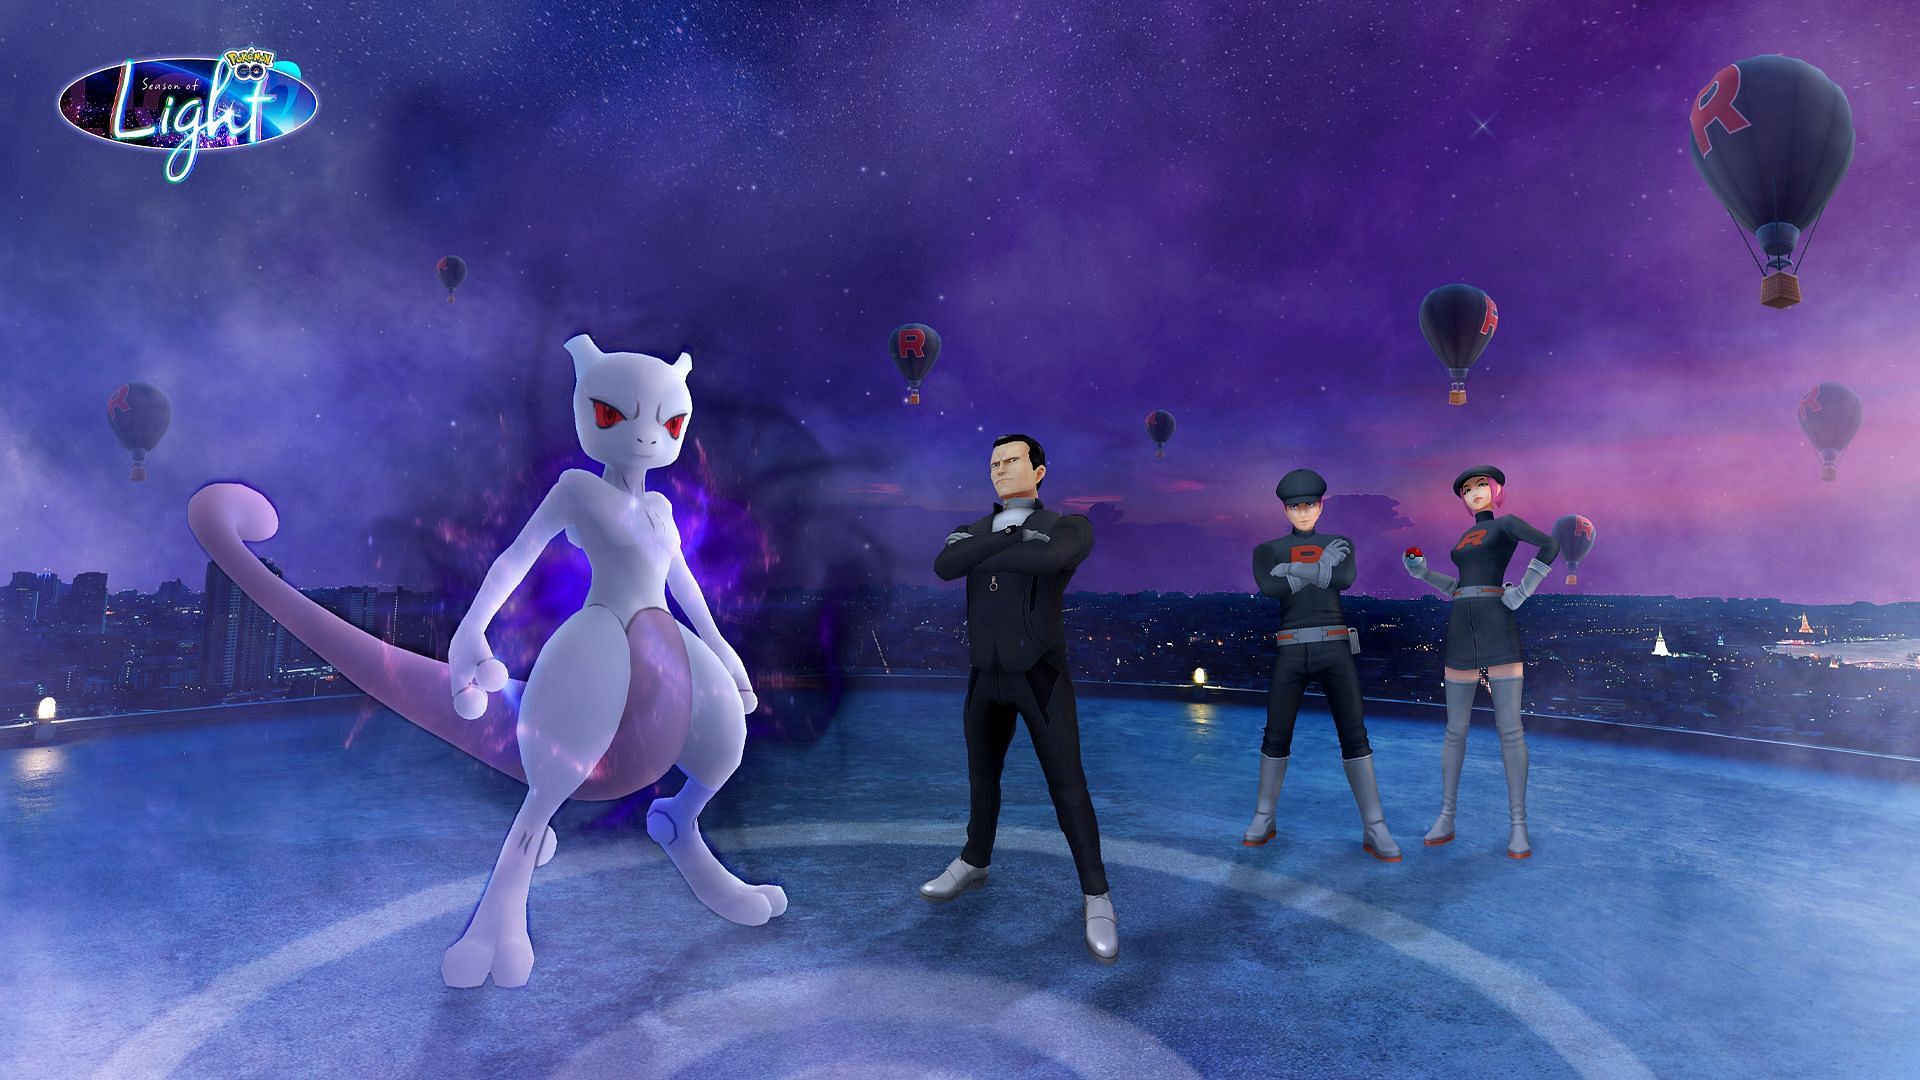 Mewtwo arrives in Pokémon Go as its newest legendary surprise